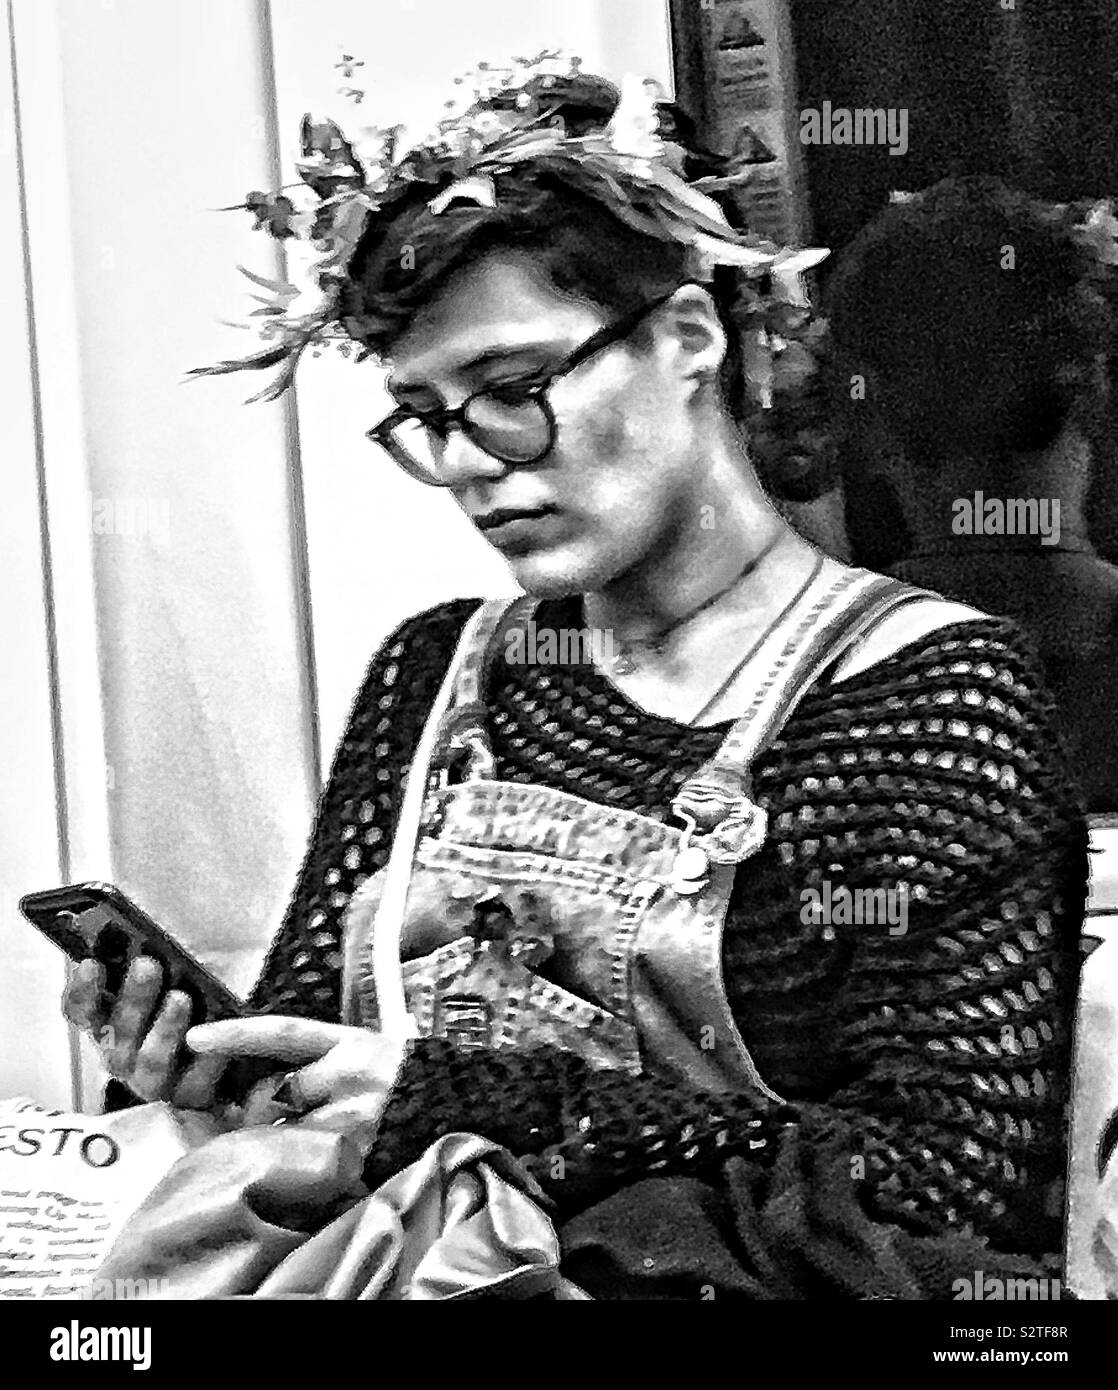 Young bespectacled lady on a train peering at her mobile phone. Her appearance is rather unconventional. The portrait is in black and white. Stock Photo